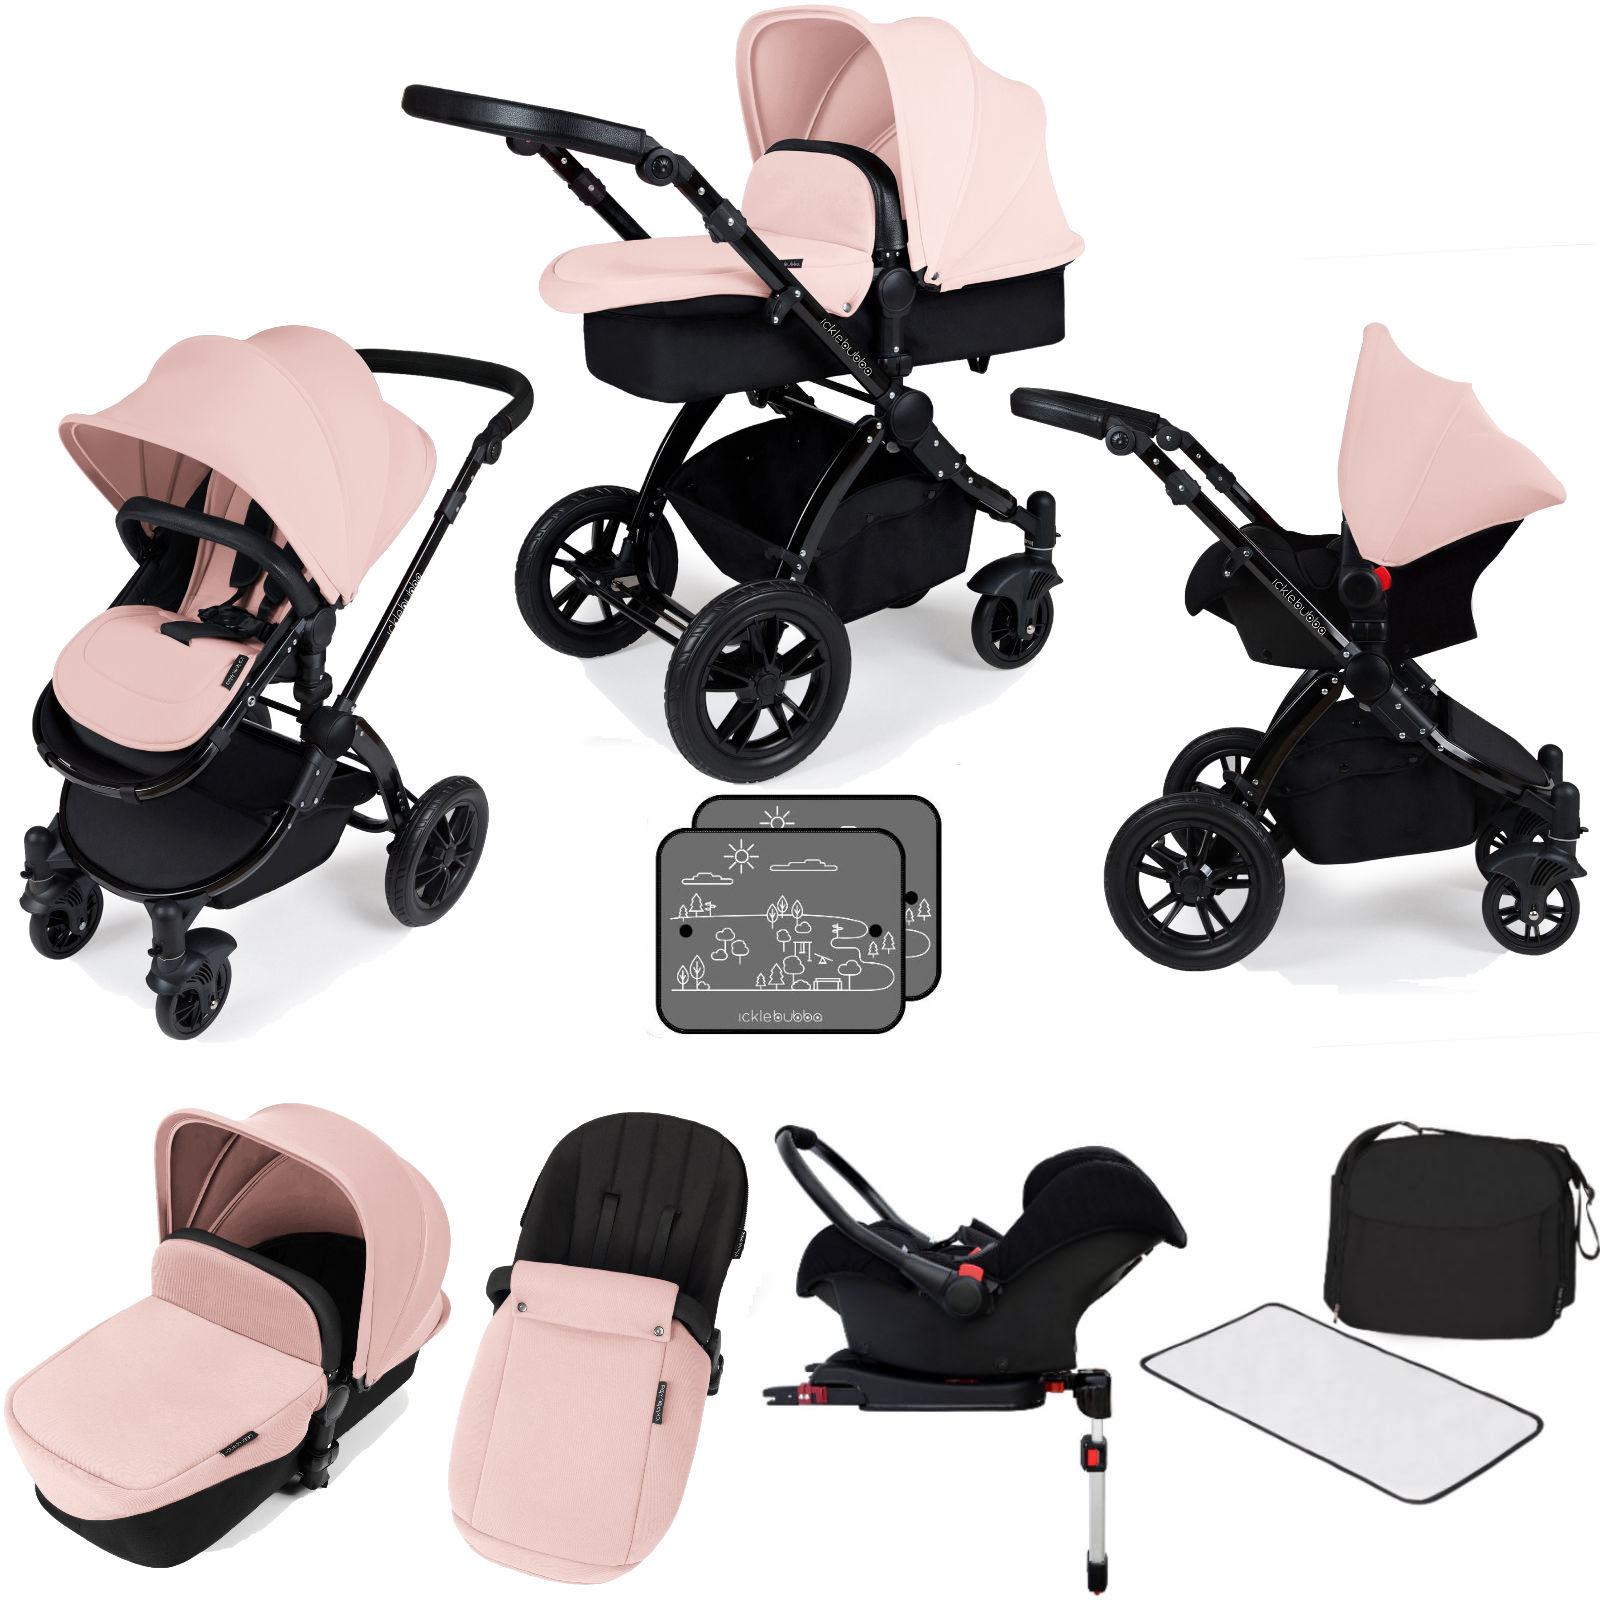 Ickle bubba Stomp V3 Black All In One Travel System & Isofix Base - Pink/Black